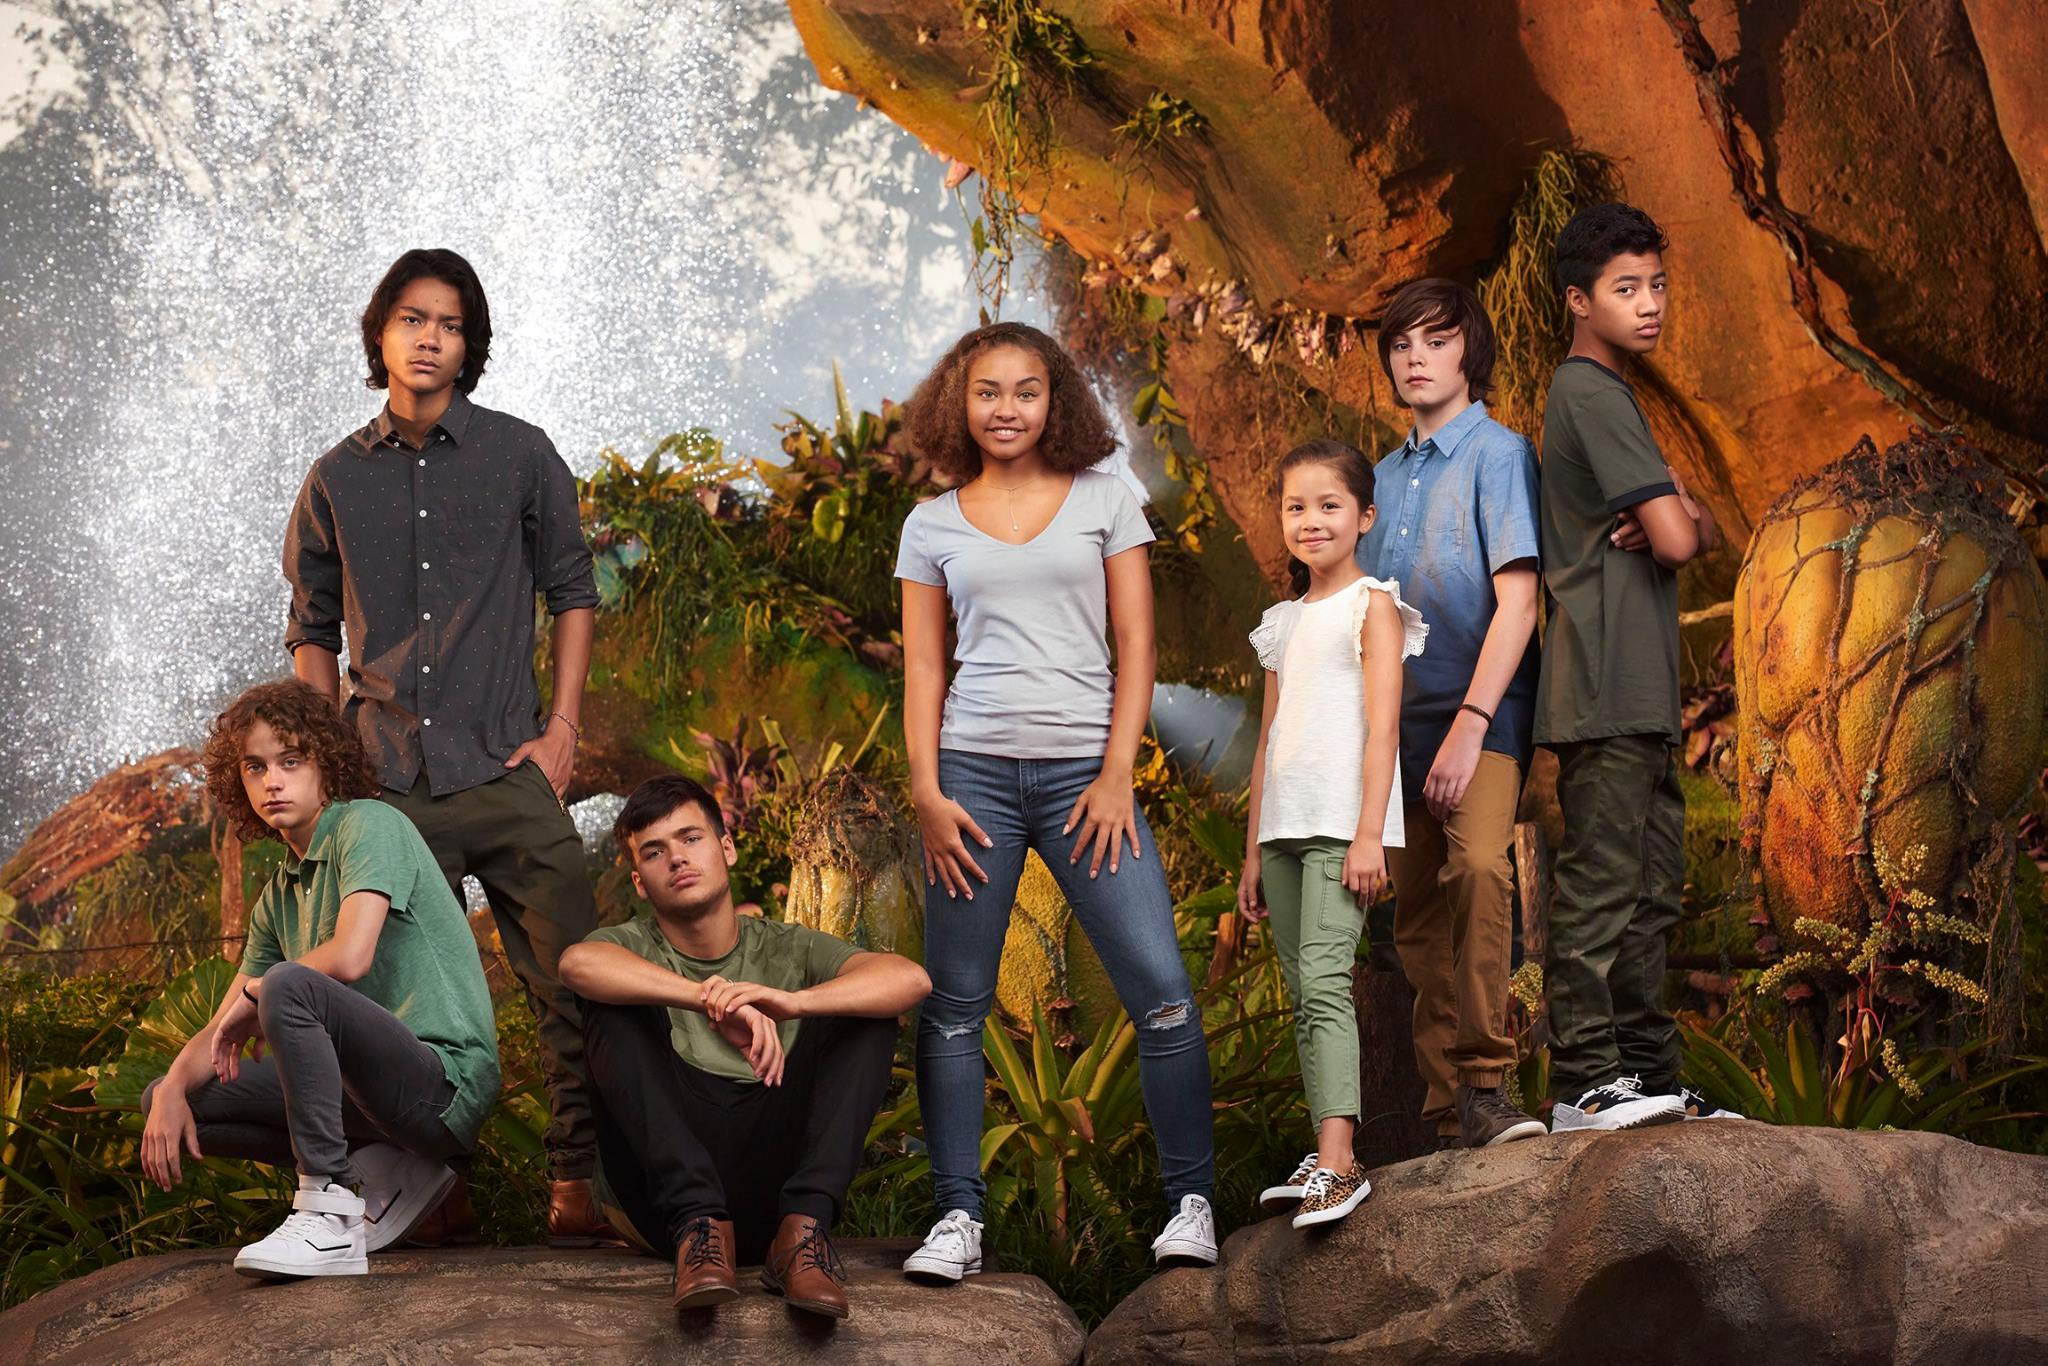  L-R: Britain Dalton (Lo&rsquo;ak of the Sully Family), Filip Geljo (Aonung of the Metkayina Clan), Jamie Flatters (Neteyam of the Sully Family), Bailey Bass (Tsireya of the Metkayina Clan), Trinity Bliss (Tuktirey of the Sully Family), Jack Champion (Javier &ldquo;Spider&rdquo; Socorro), and Duane Evans Jr (Rotxo of the Metkayina Clan) at Pandora &ndash; The World of Avatar at Disney&rsquo;s Animal Kingdom.